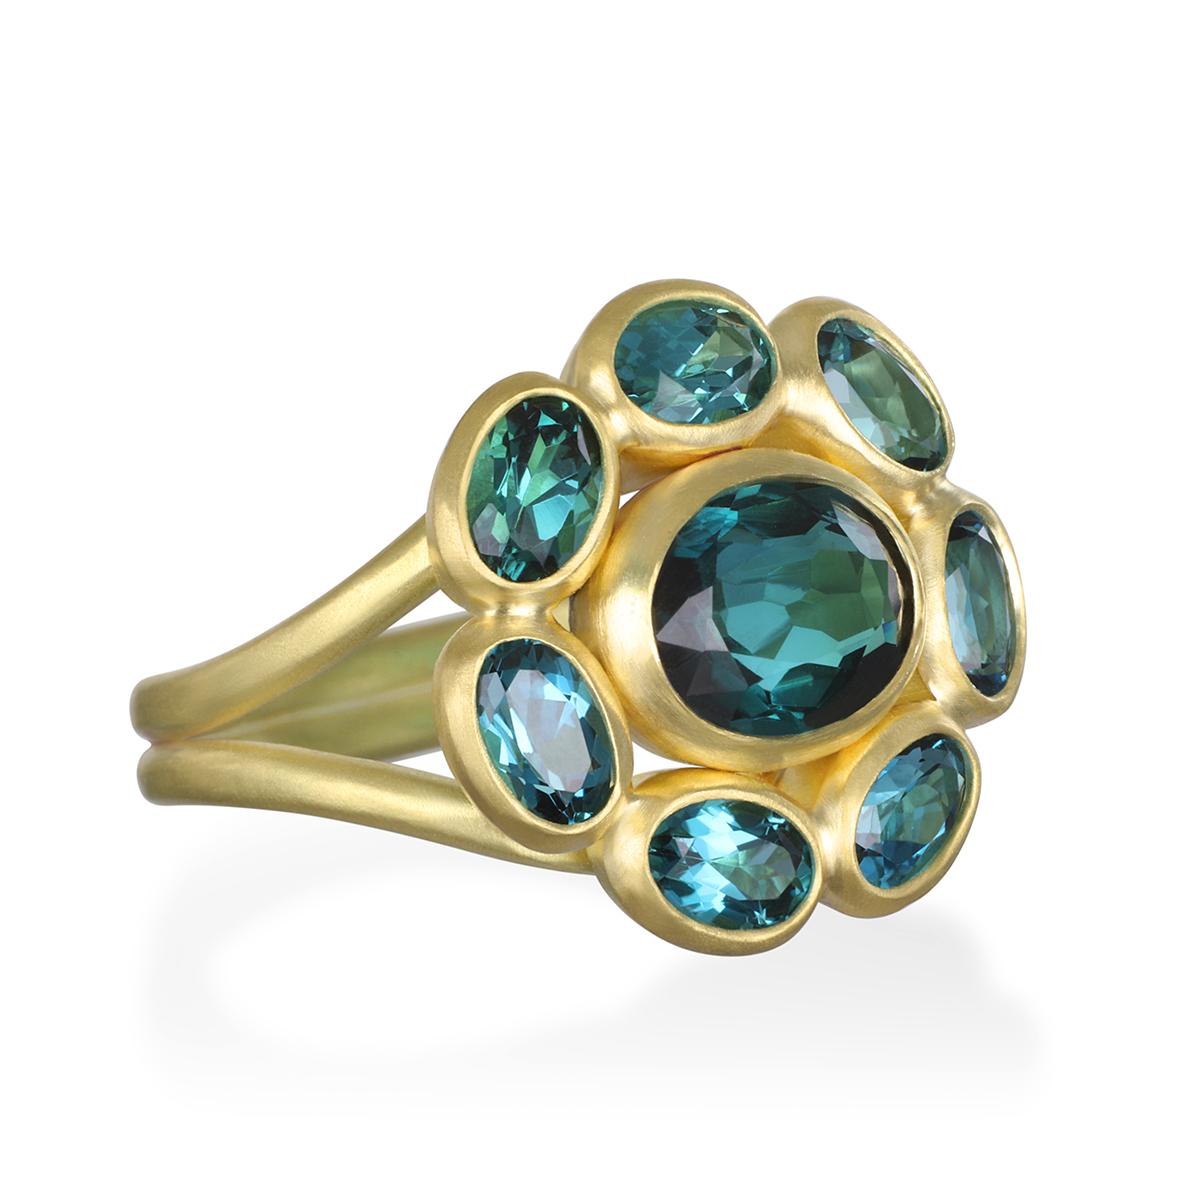 Faye Kim's handcrafted 18 Karat Gold Blue-Green Tourmaline Daisy Ring, with its bezel settings and matte finish, marries nature's beautiful blue greens with the timelessness of gold to create a work of art. The spectacular faceted oval Tourmaline